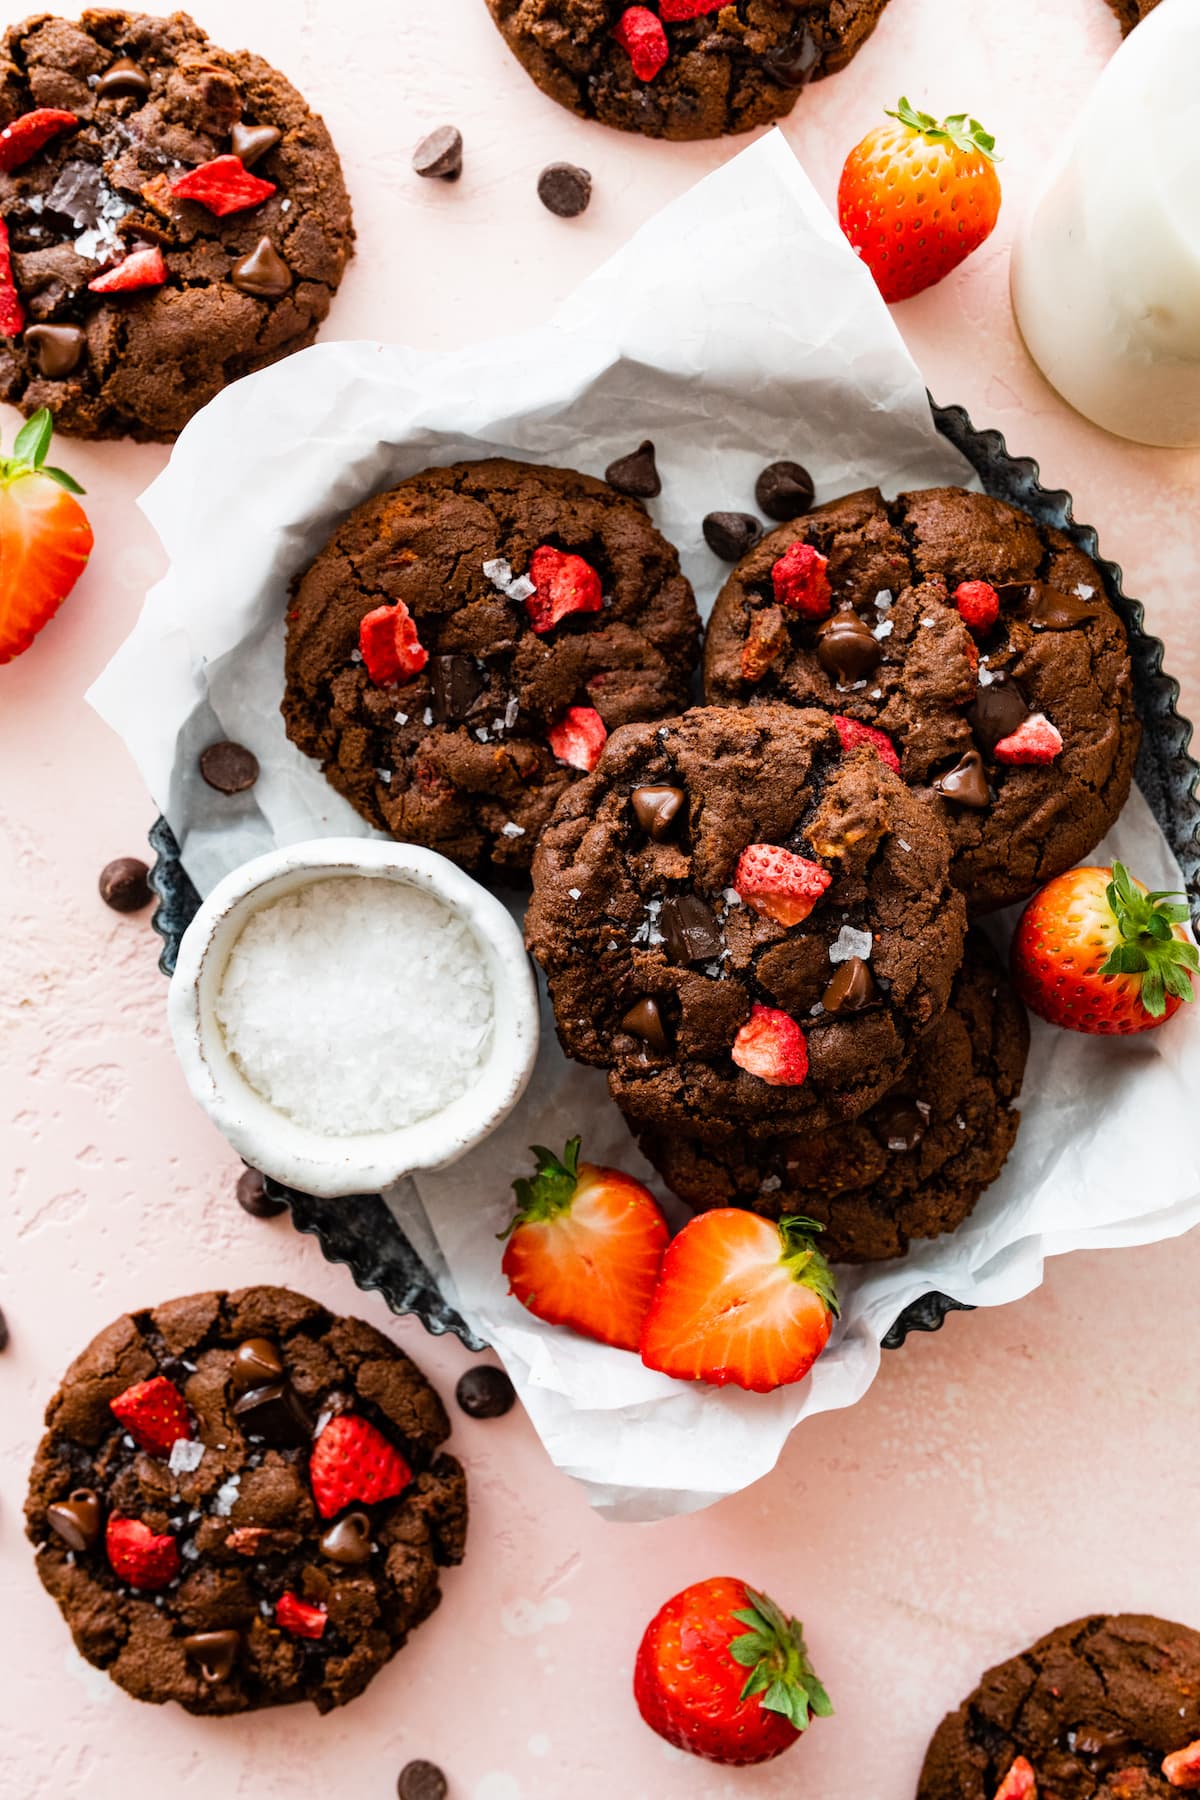 Strawberry Chocolate Cookies - Two Peas & Their Pod